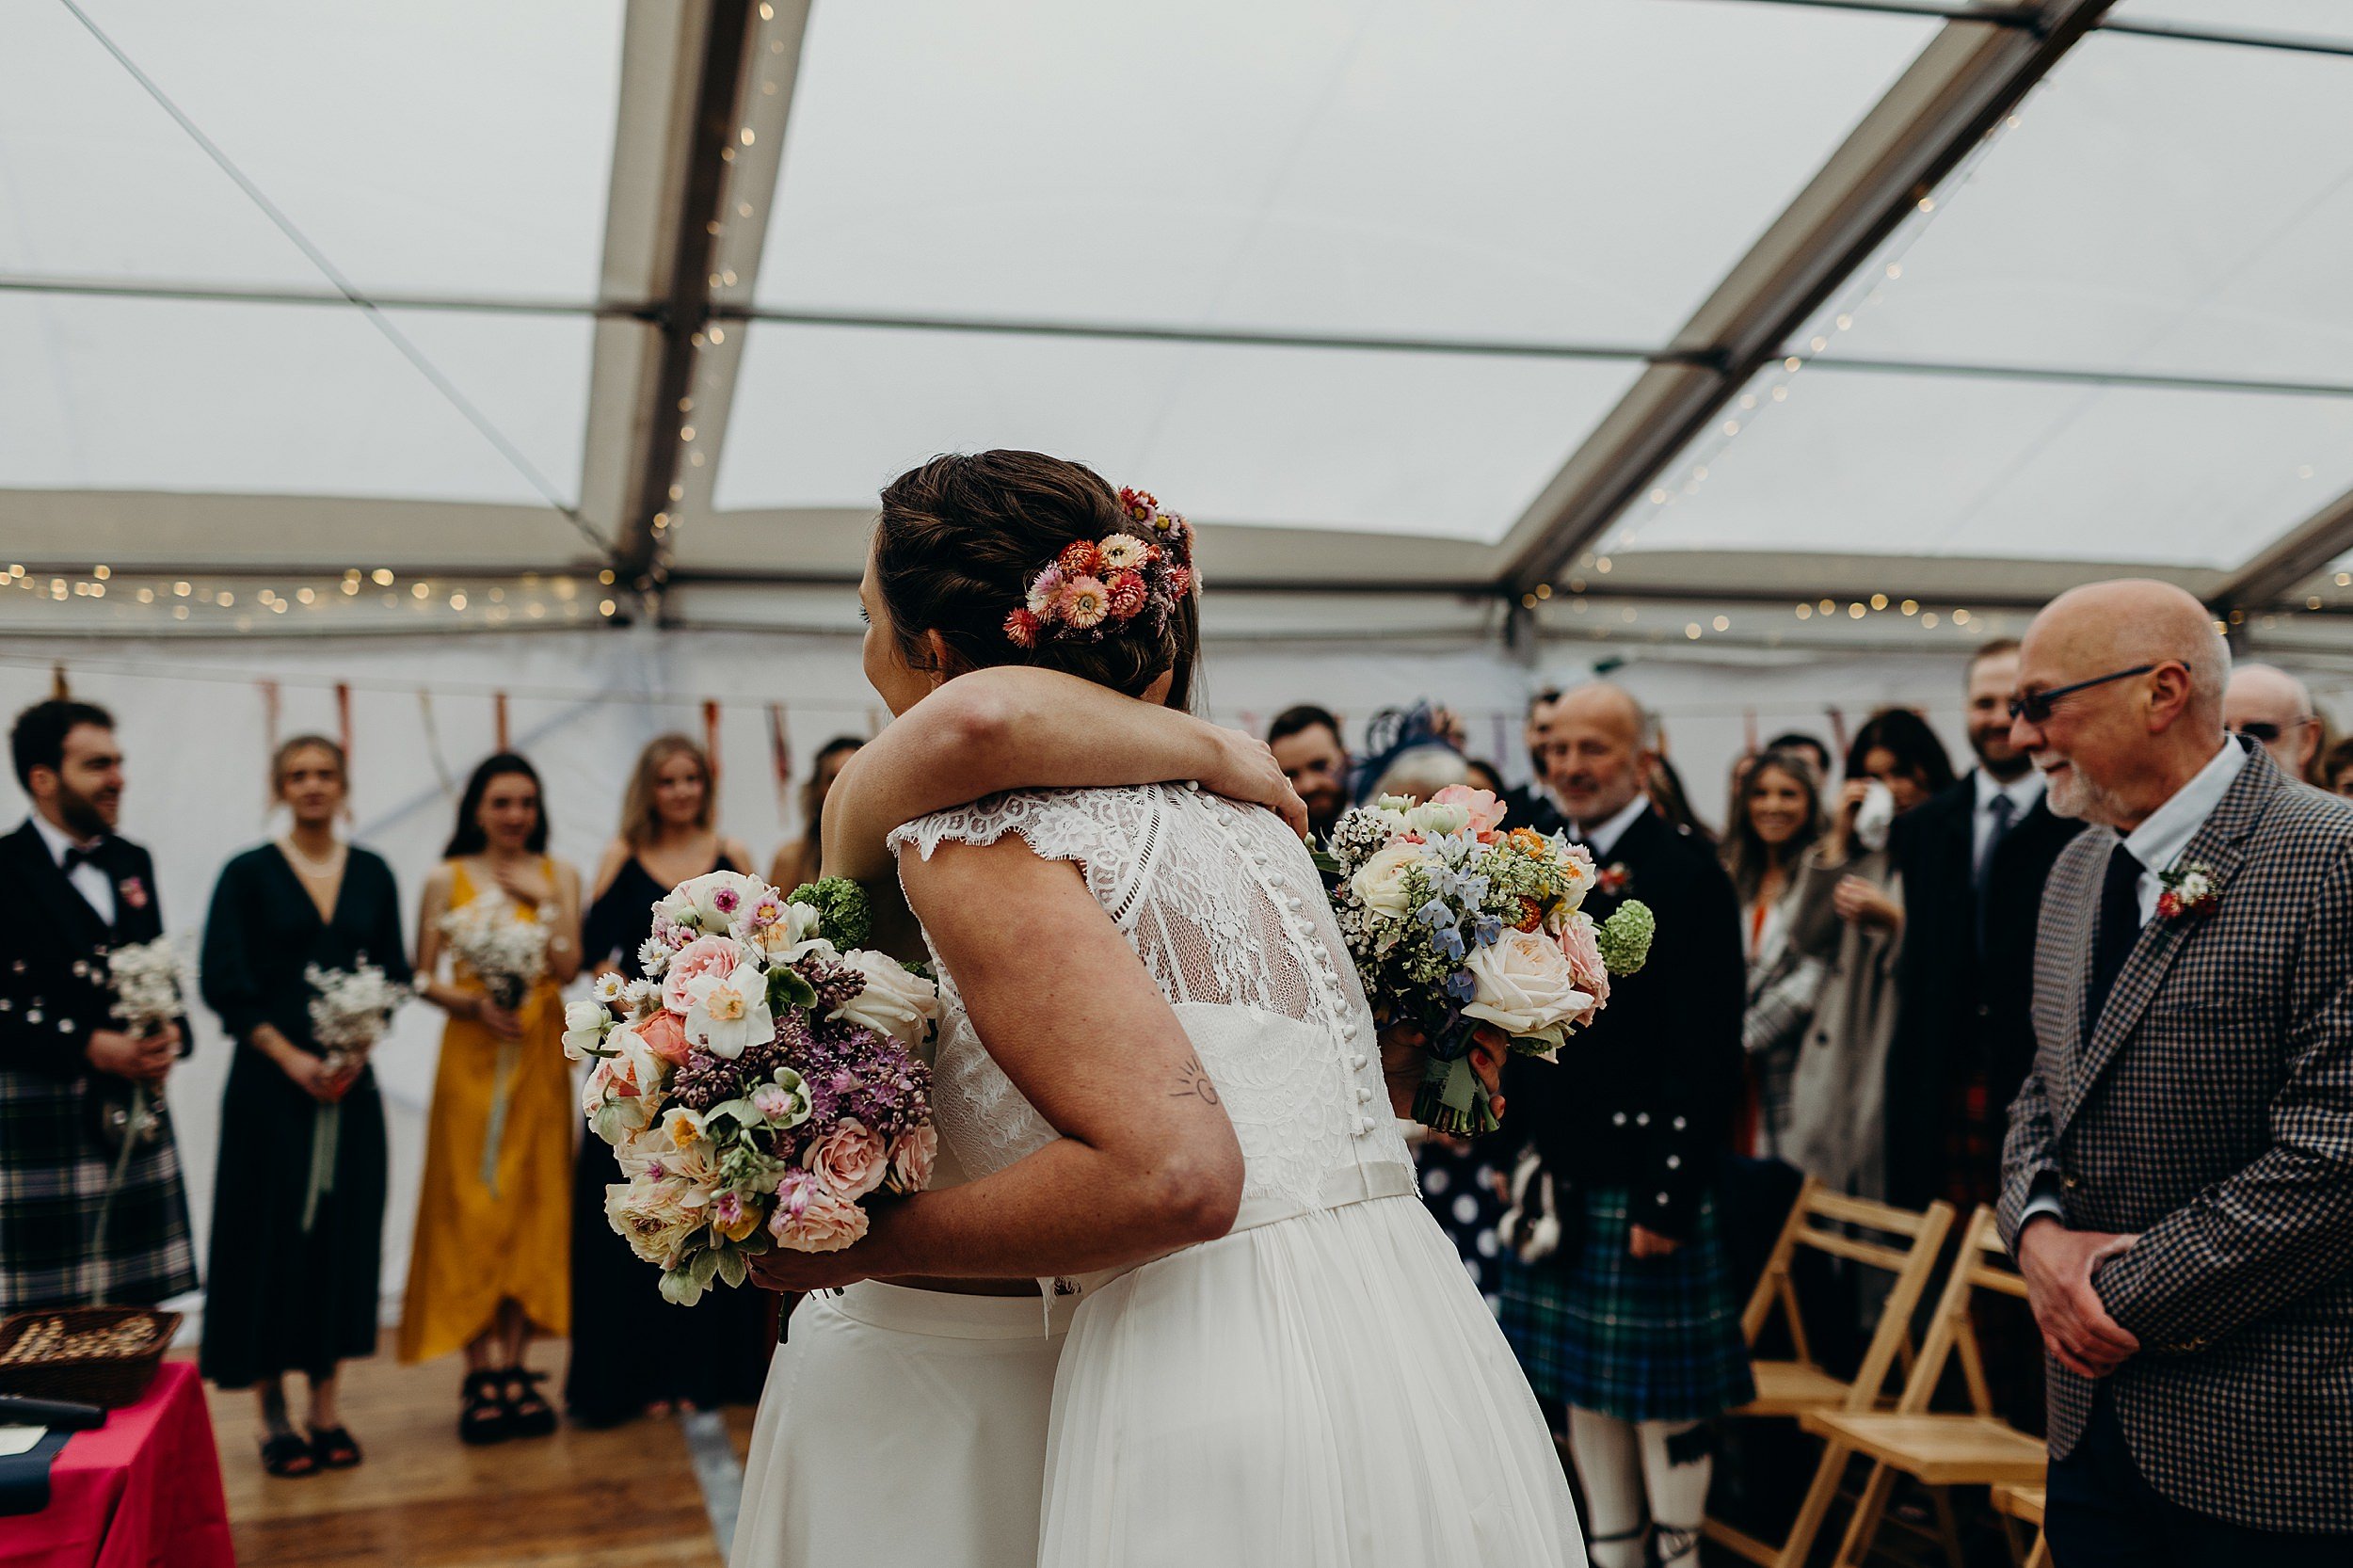 the two brides embrace as bridesmaids and guests look on before their harvest moon wedding in dunbar in scotland